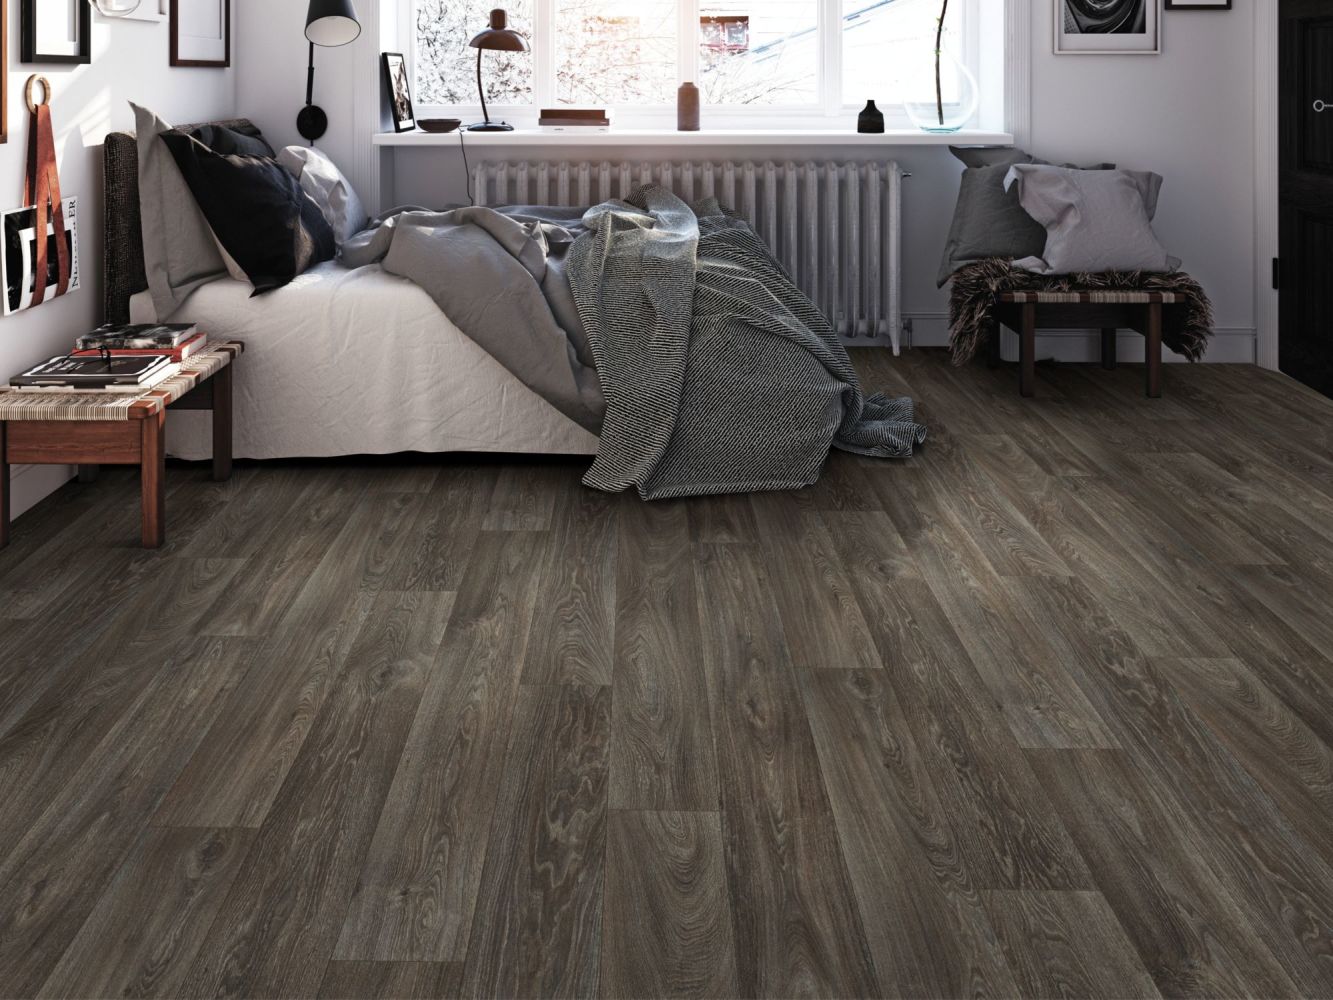 Shaw Floors Resilient Residential Urban Woodlands 65g Montgomery 00756_VG088